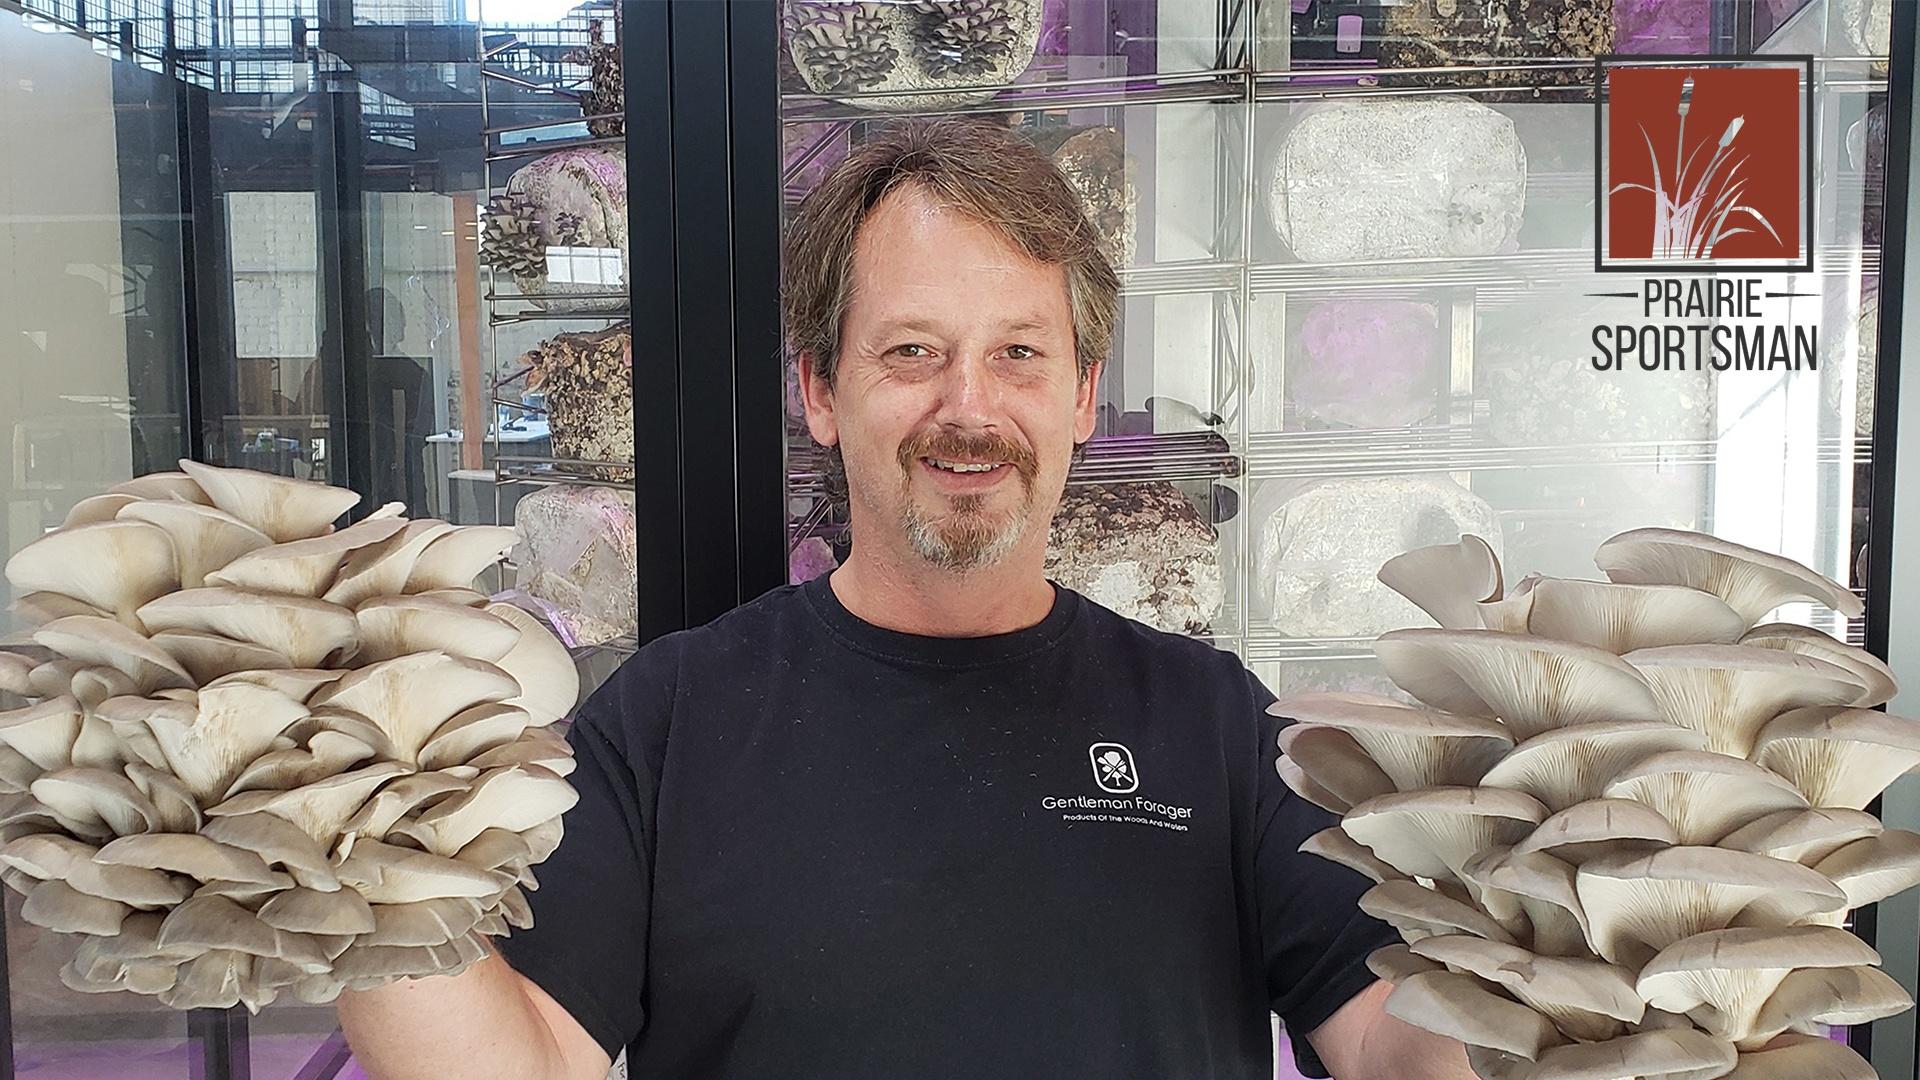 Mike Kempenich grows wild mushrooms in a 14 foot tall glass chamber at Keg and Case Market in St. Paul